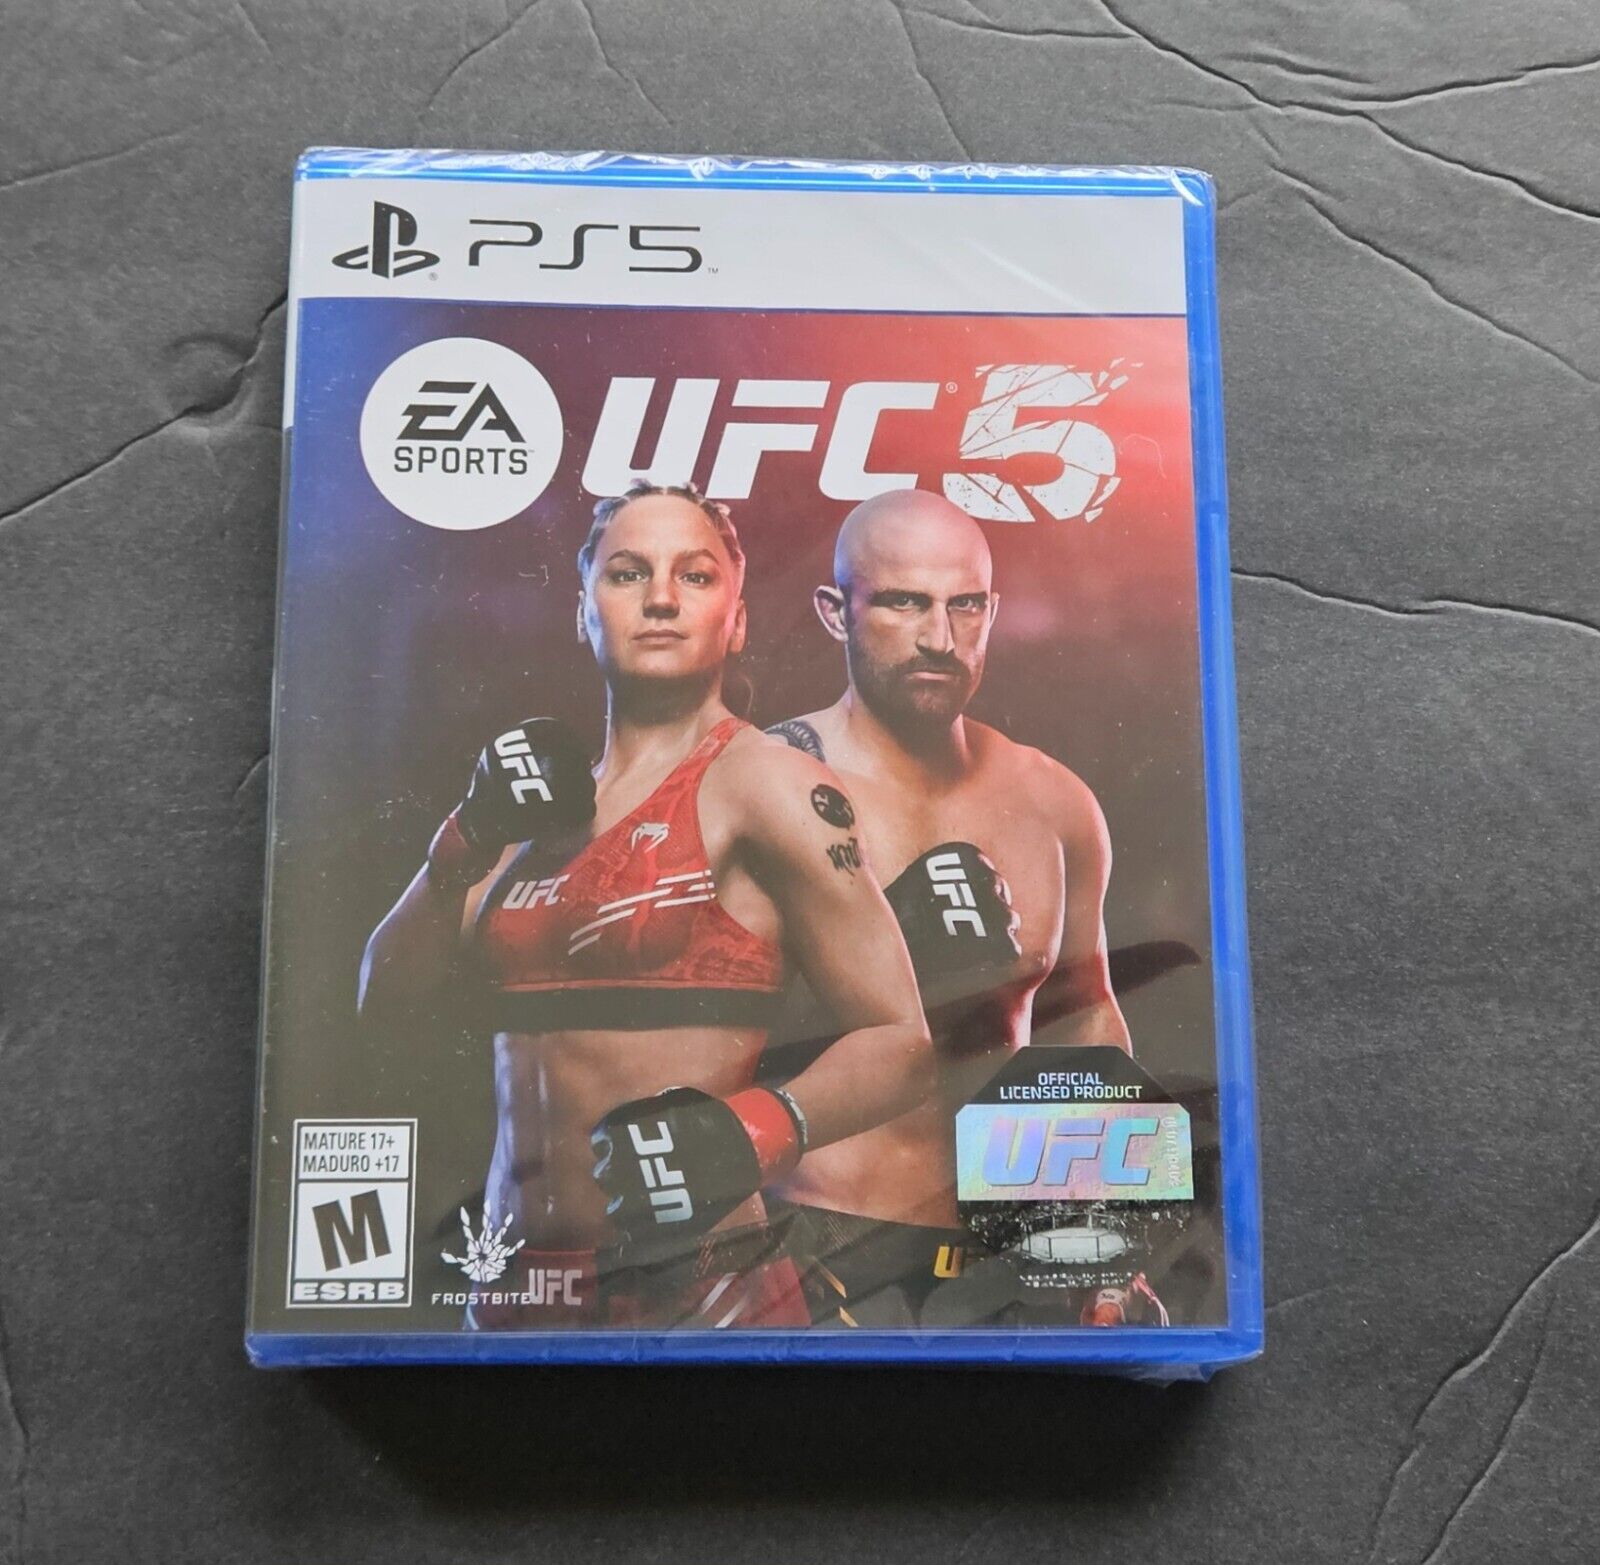 Fancy UFC 5 Video Game for Playstation 5/factory sealed. on eBay